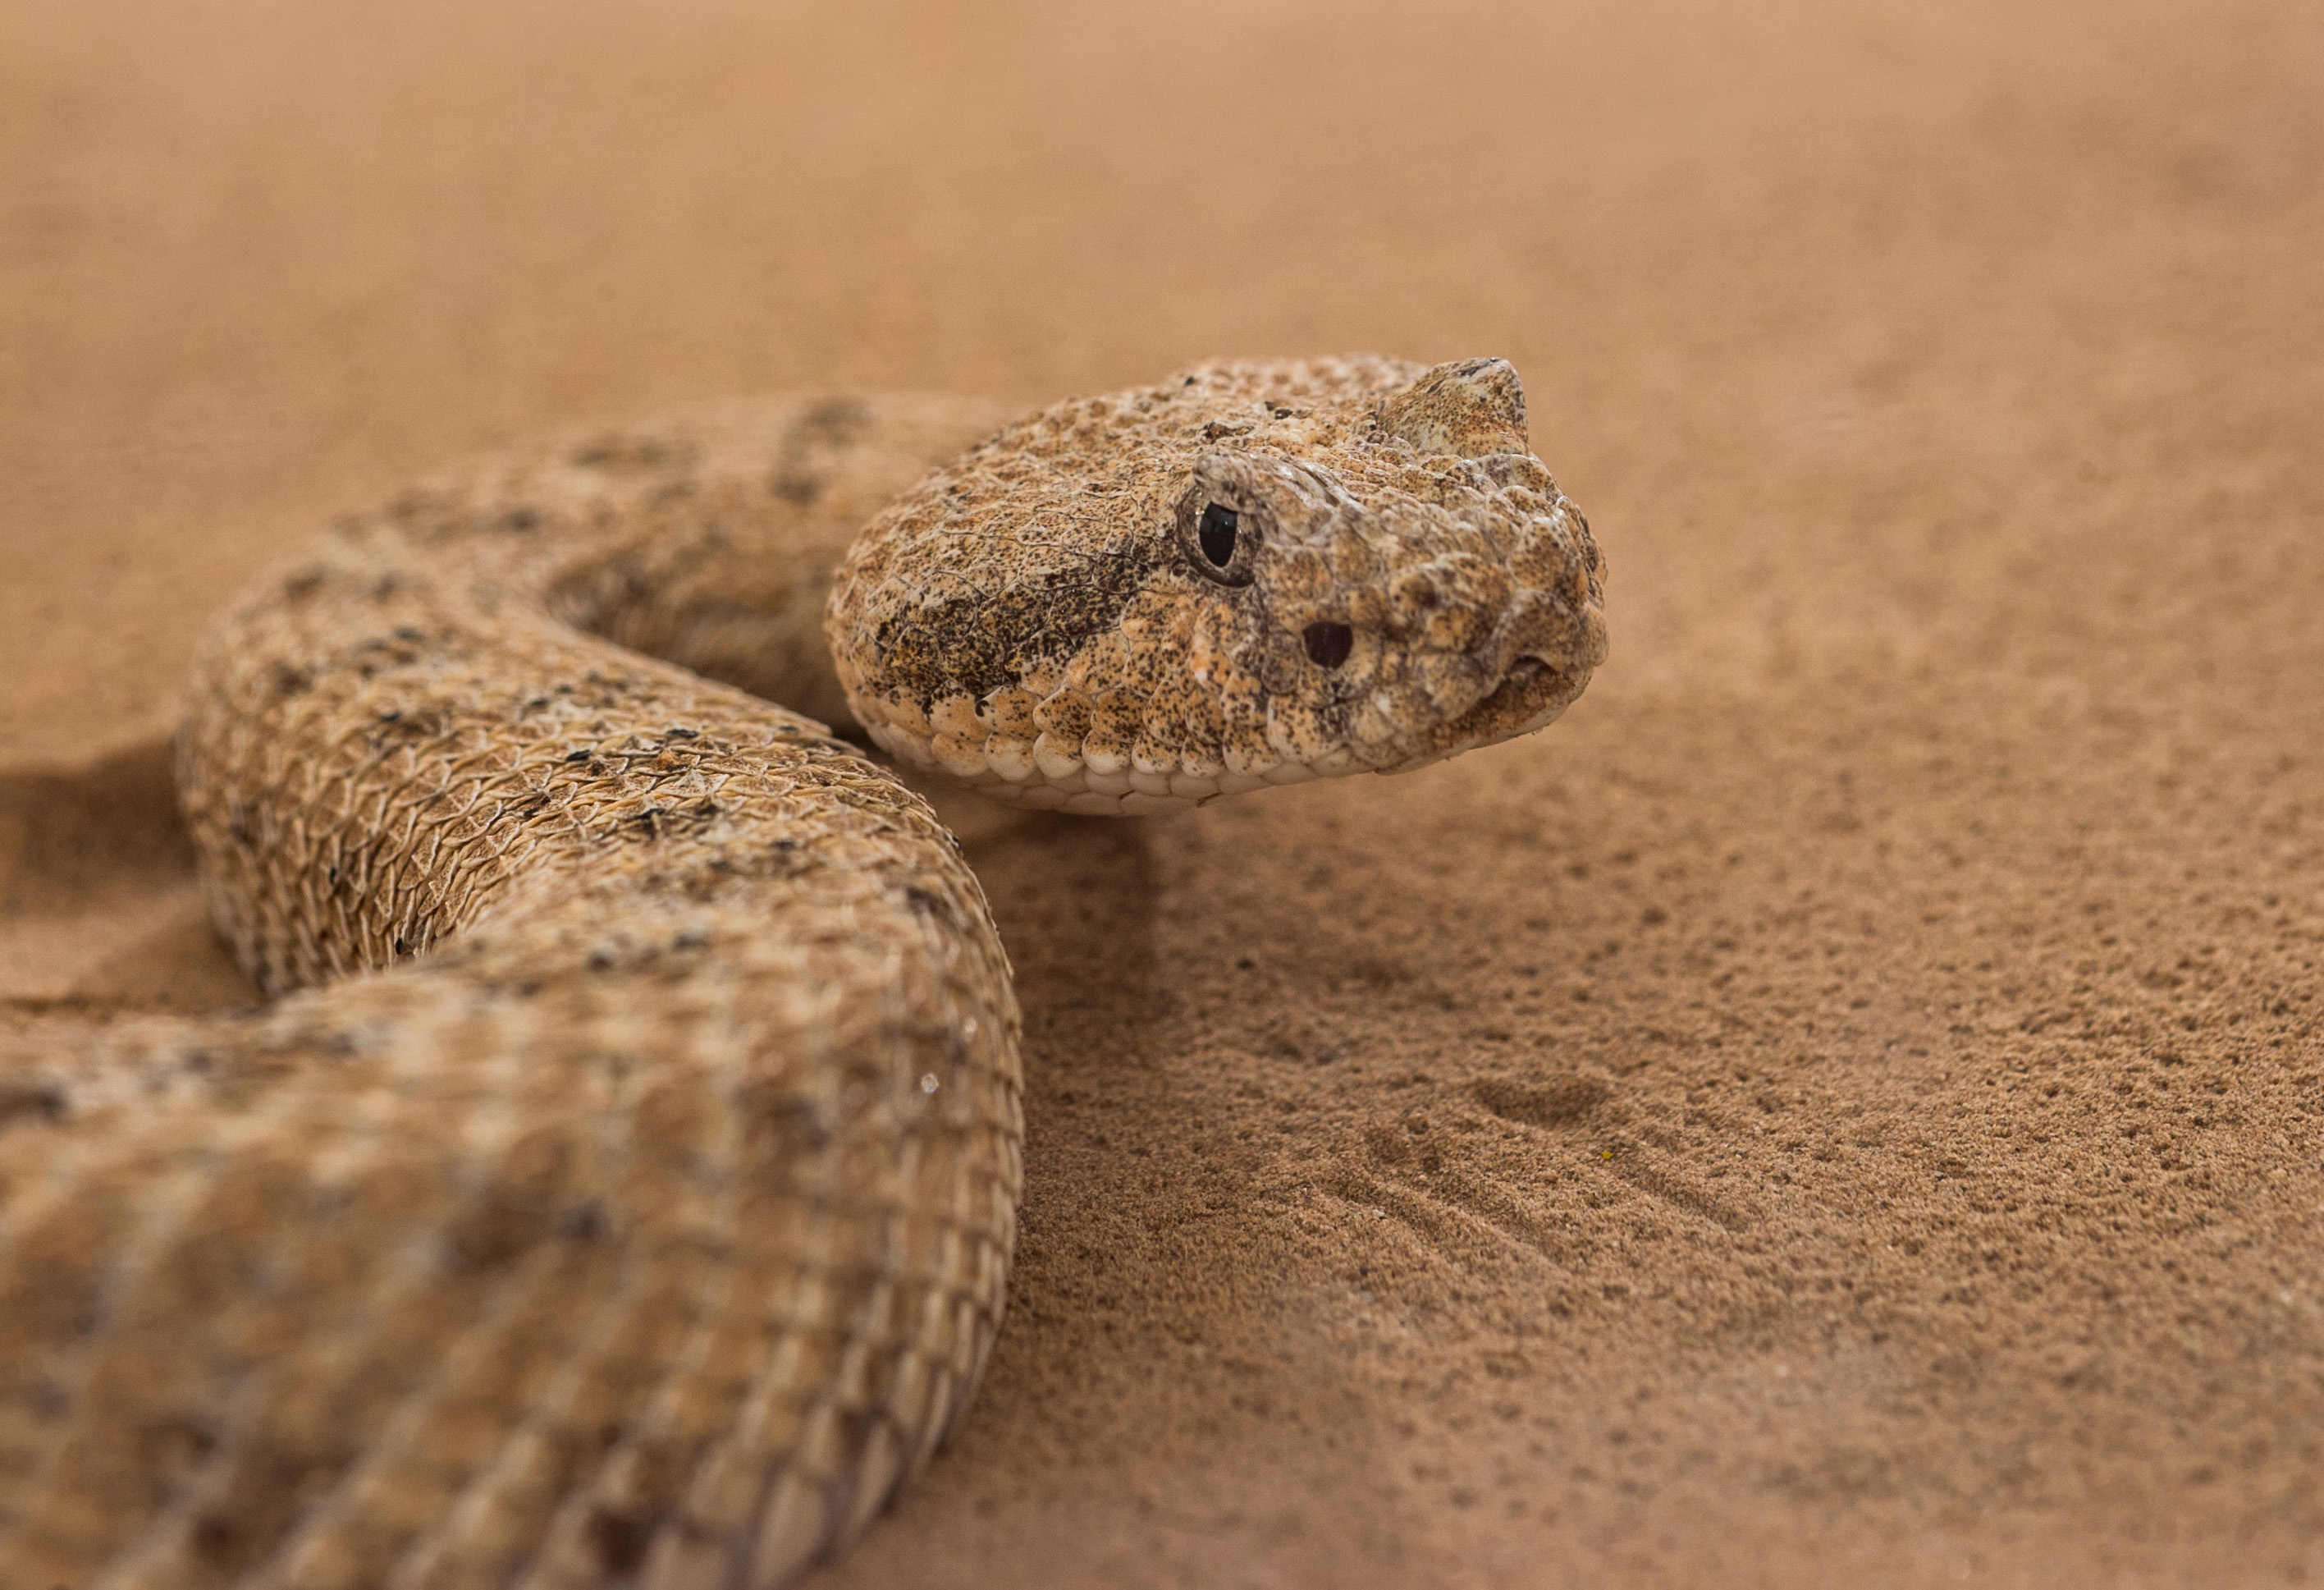 A sidewinder snake is shown in a sand-filled trackway at Zoo Atlanta. Researchers from Georgia Tech, Carnegie Mellon University, Zoo Atlanta and Oregon State University studied the snakes to understand the unique motion they use to climb sandy slopes. (Credit: Rob Felt)